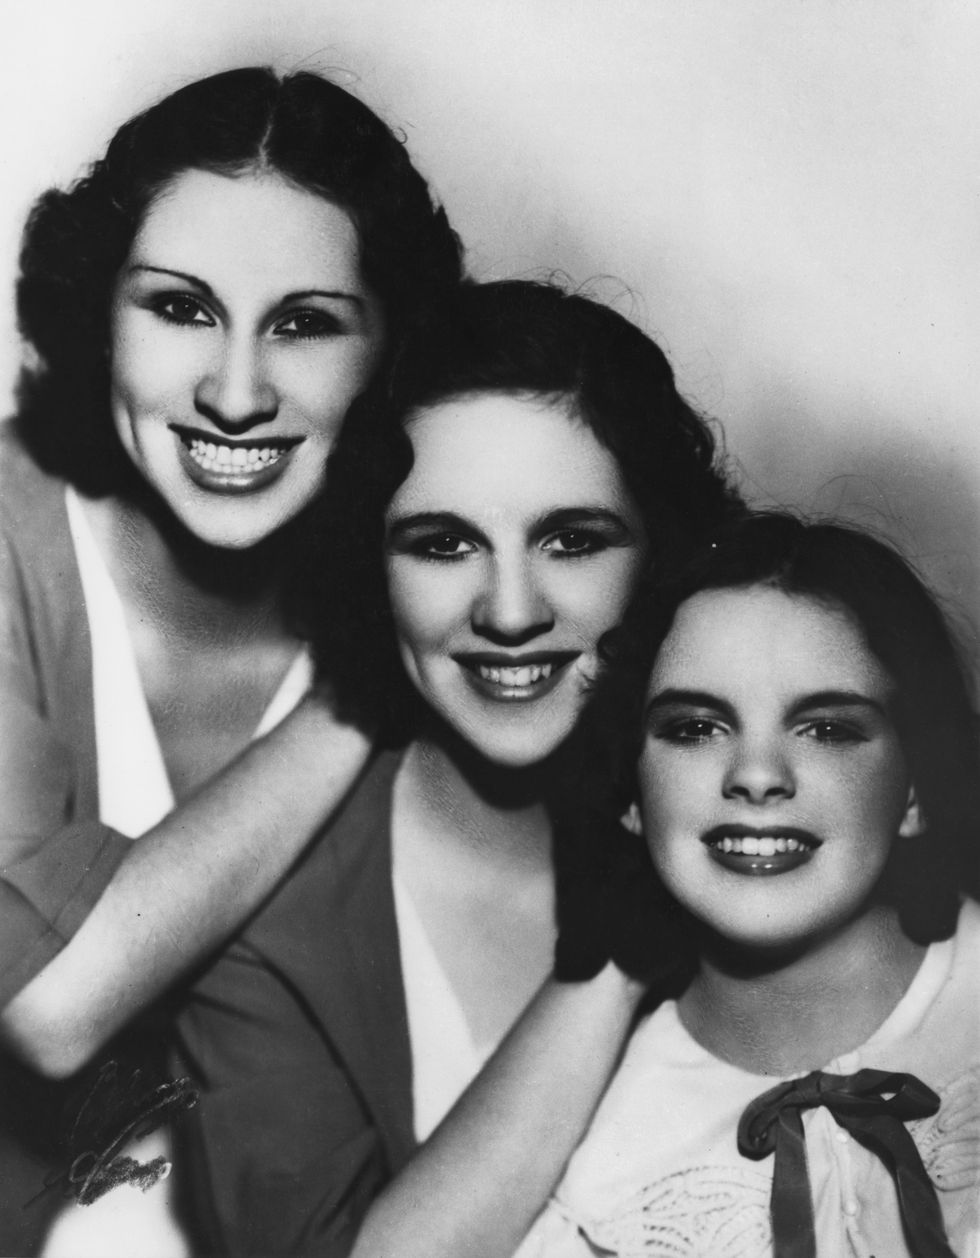 The Gumm Sisters　American actress and singer Judy Garland (1922 - 1969) with her sisters in a promotional portrait for their musical trio The Gumm Sisters, circa 1935. From left to right, Mary Jane Gumm, aka Suzy or Suzanne (1915 - 1964), Dorothy Virginia Gumm, aka Jimmie (1917 - 1977) and Frances Ethel Gumm (later Judy Garland